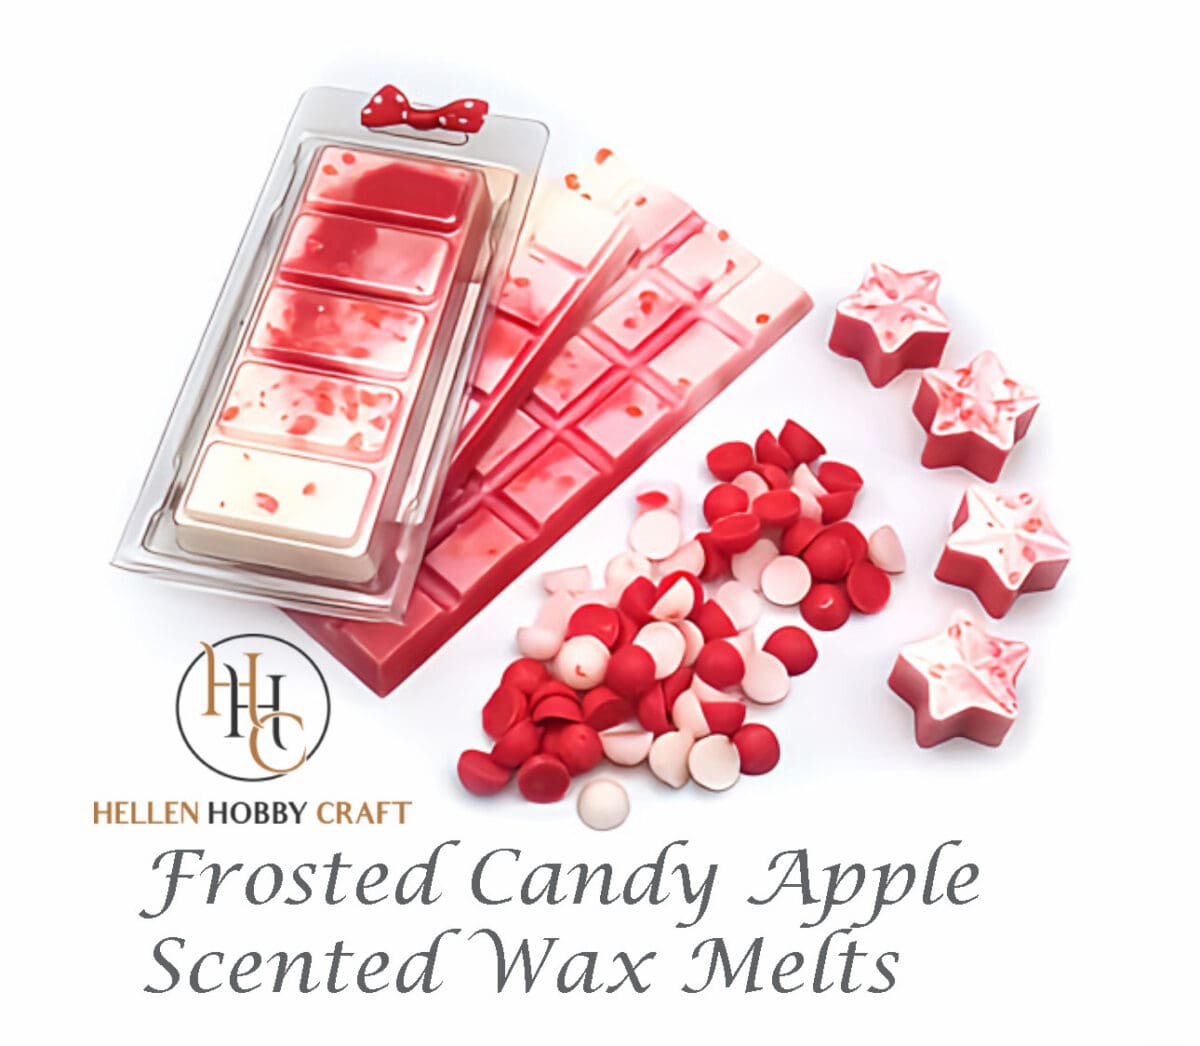 Frosted Candy Apple Highly Scented Wax Melts